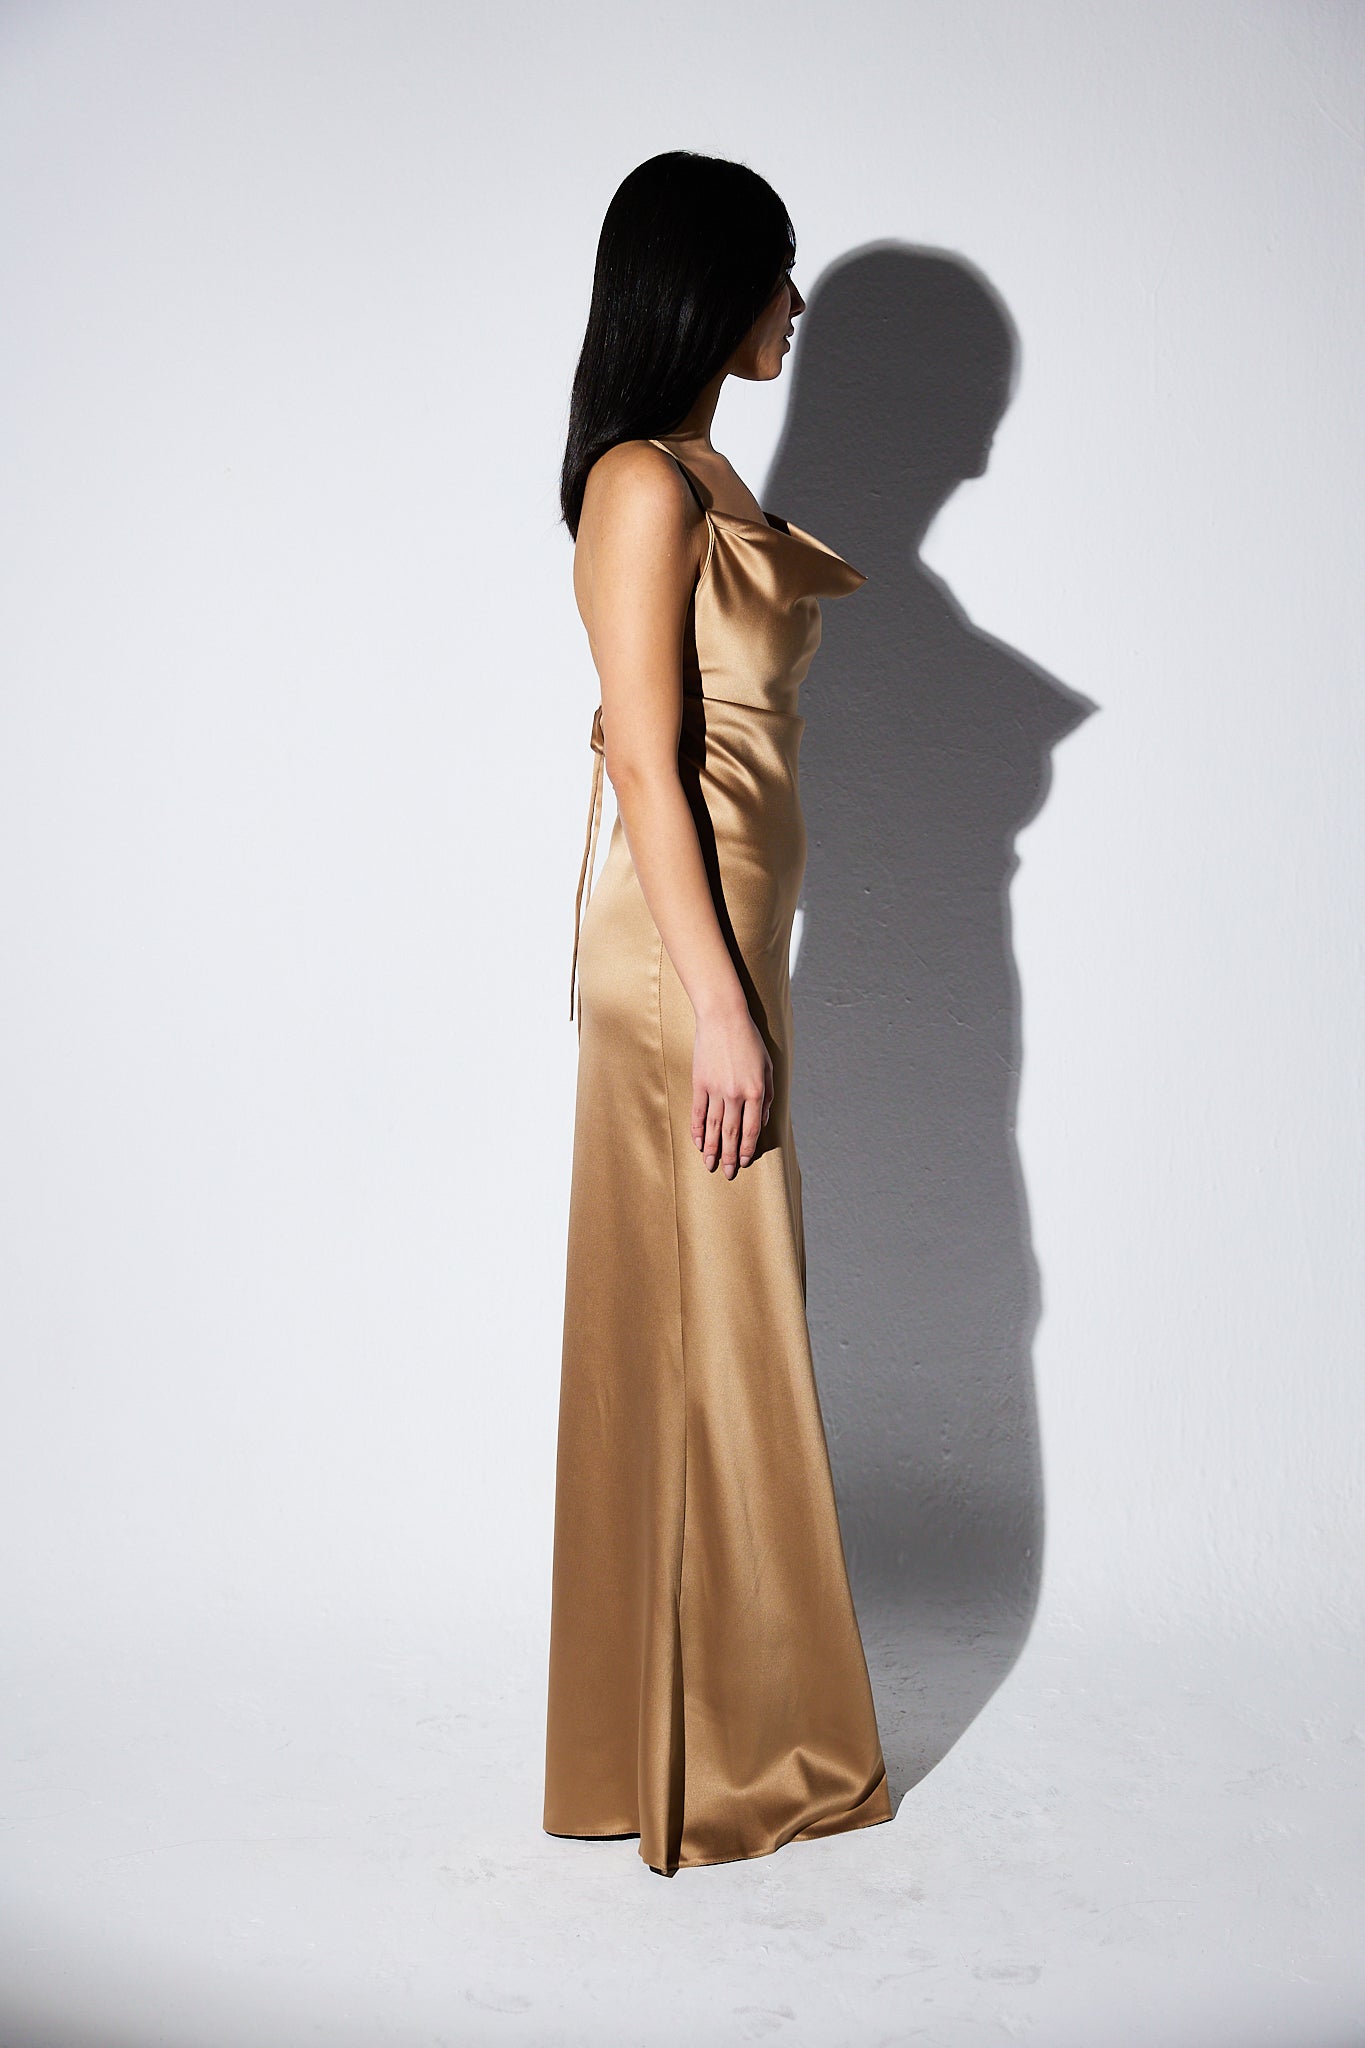 The Backless Satin in Gold